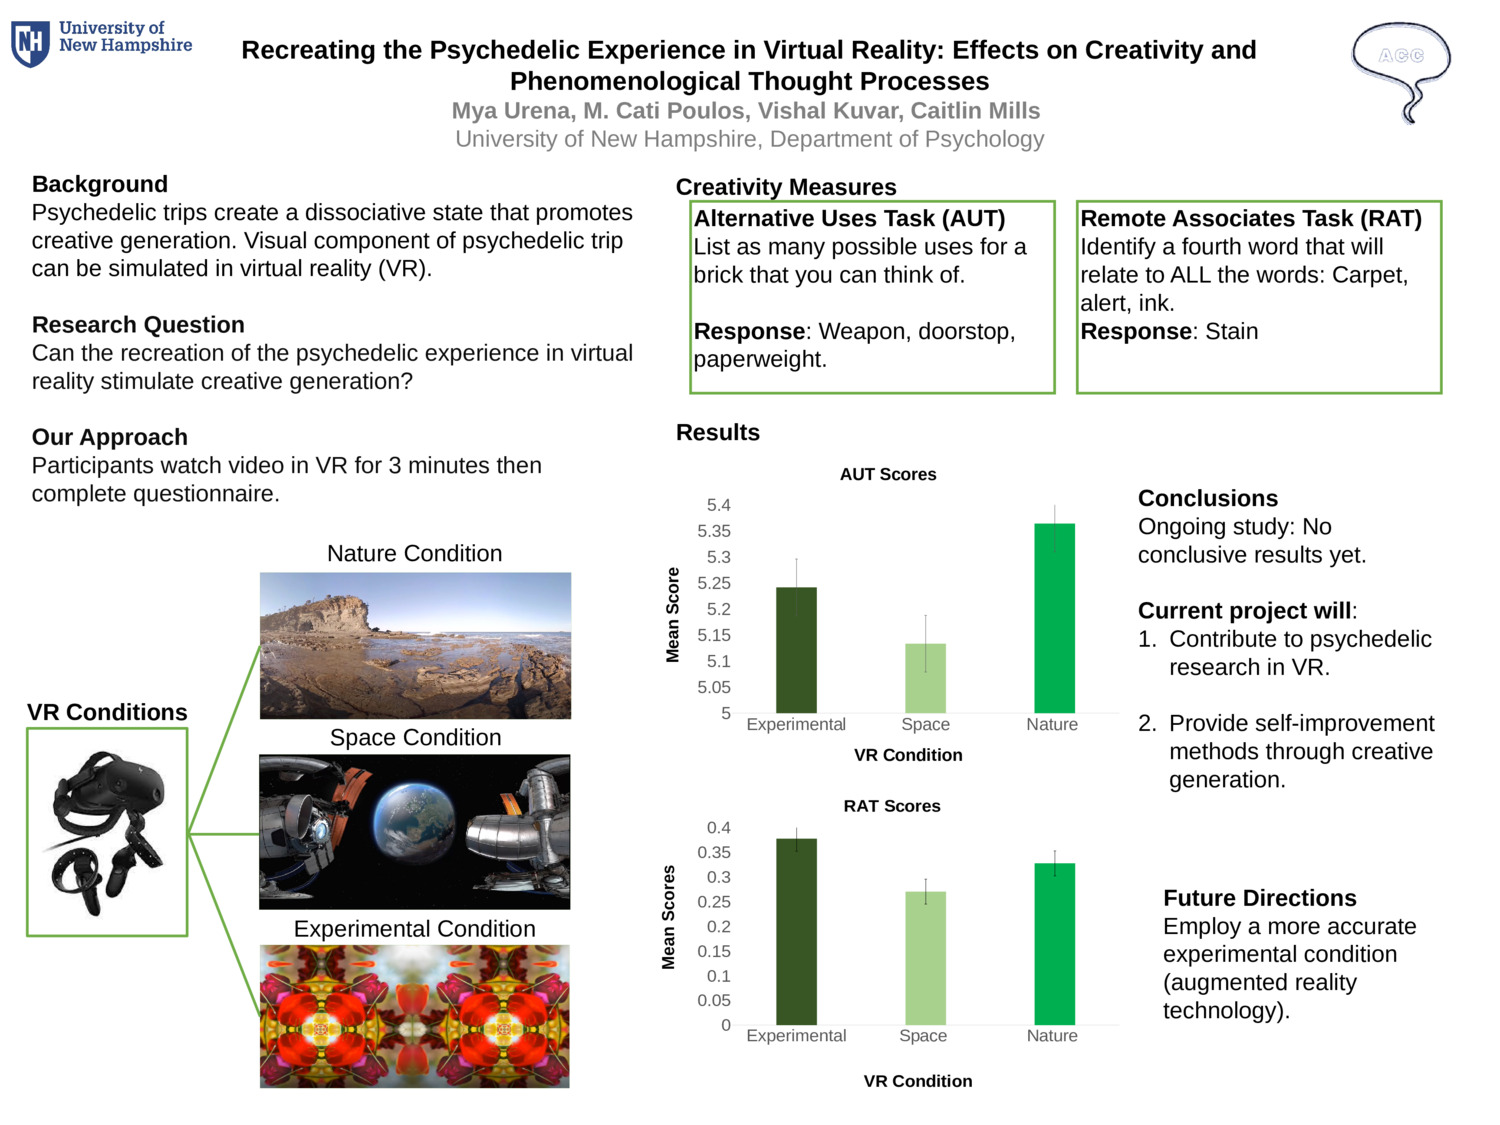 Recreating The Psychedelic Experience In Virtual Reality: Effects On Creativity And Phenomenological Thought Processes by meu1000